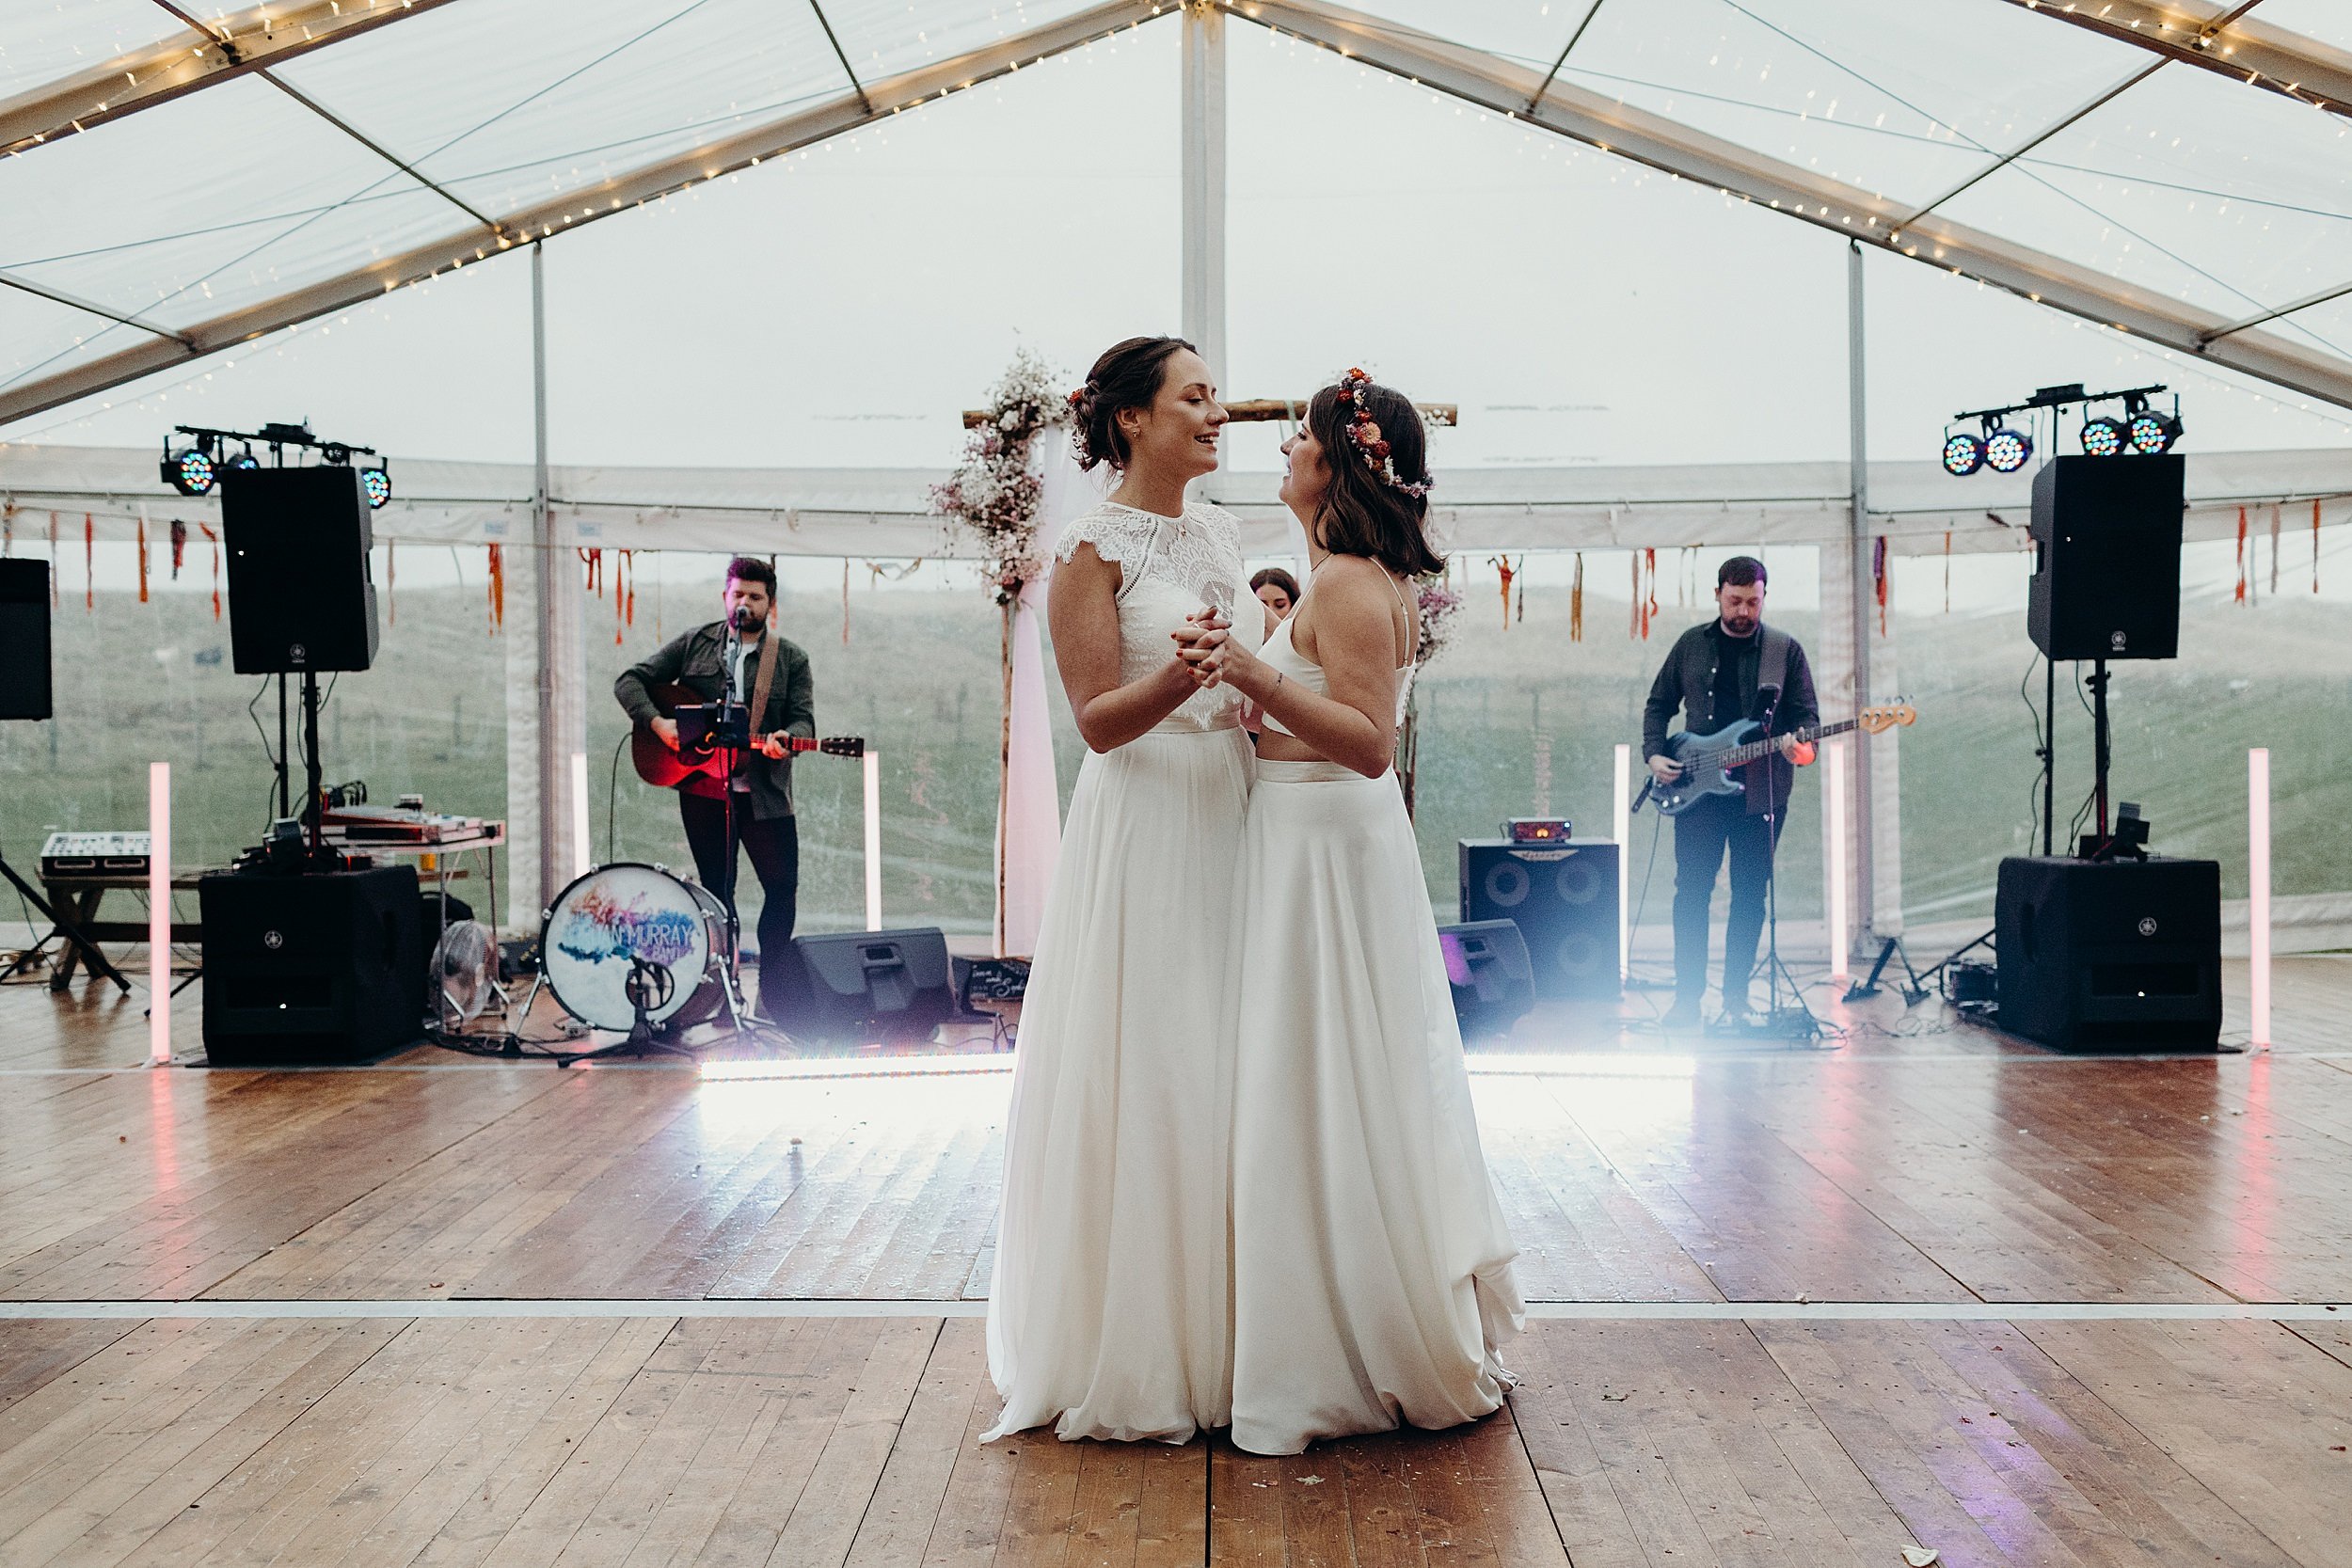 the two brides dance their first dance in a white marquee at harvest moon wedding venue in dunbar scotland a band is visible playing in the background